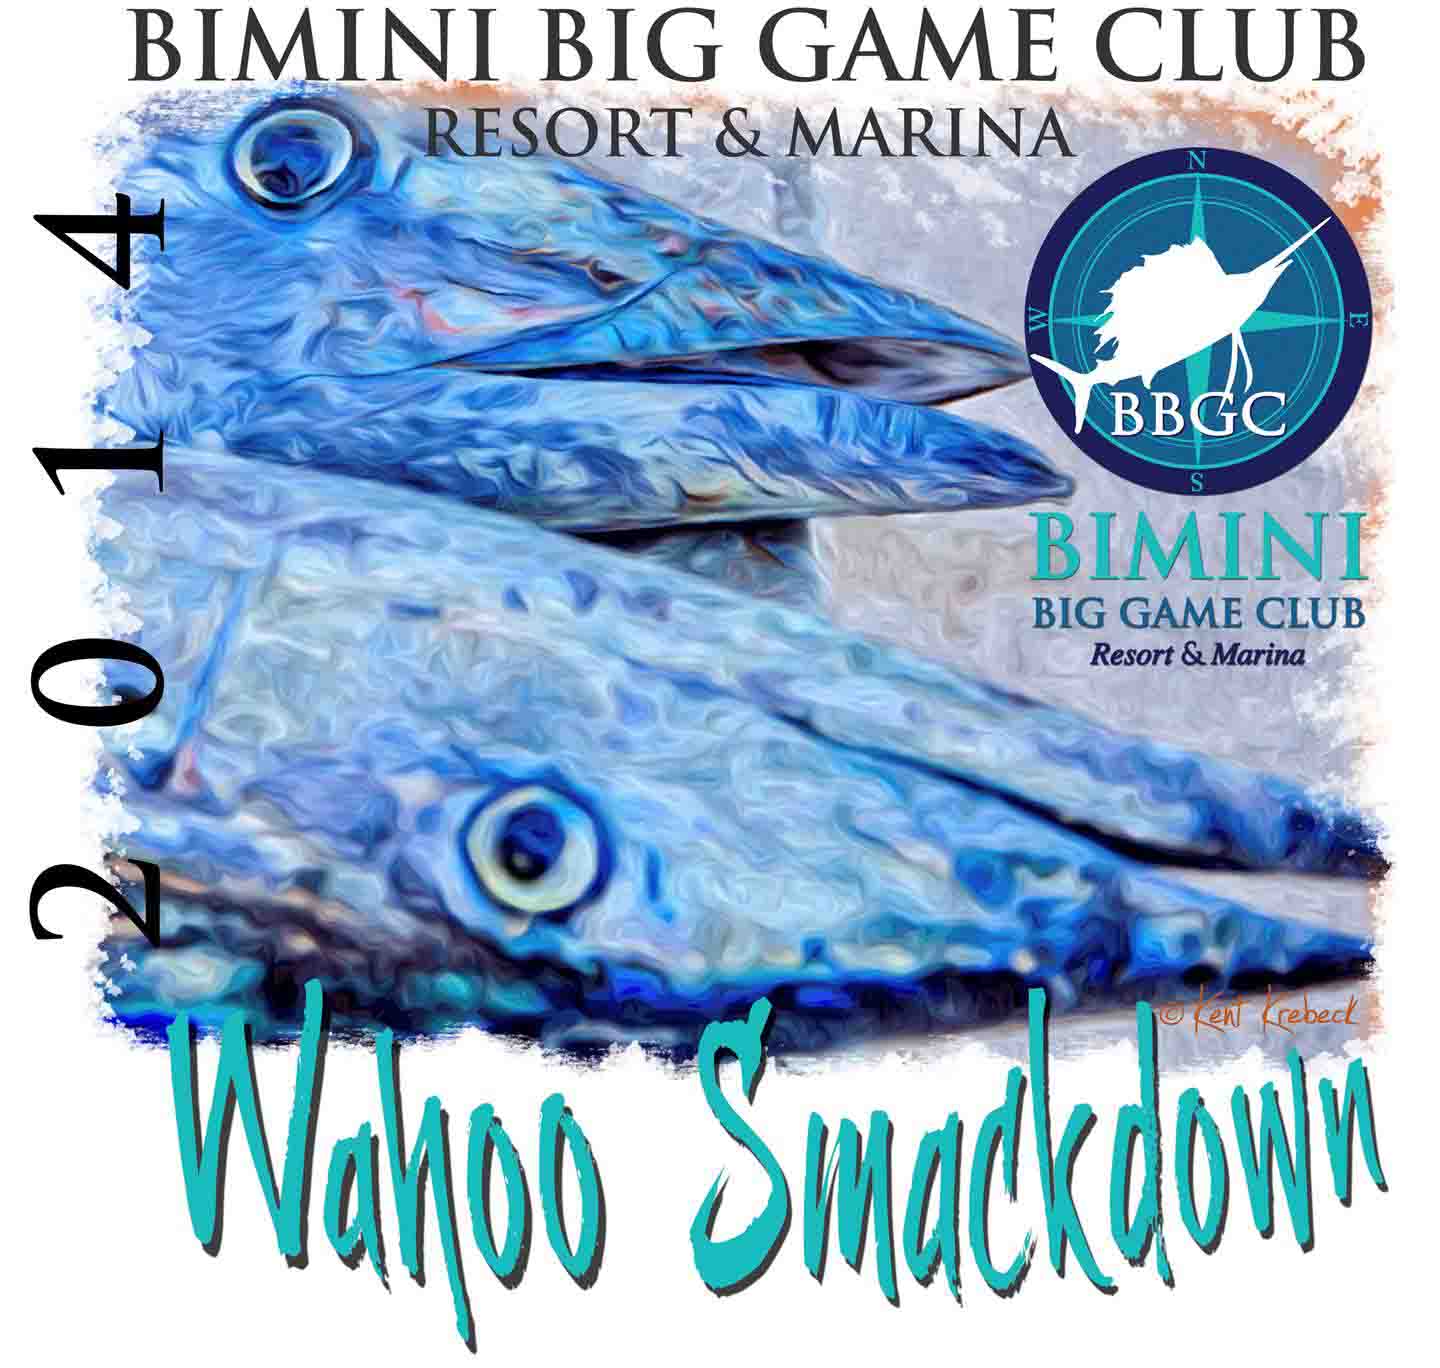 Bimini Big Game Club Wahoo Smackdown IV Tournament on Track to Be Best Ever